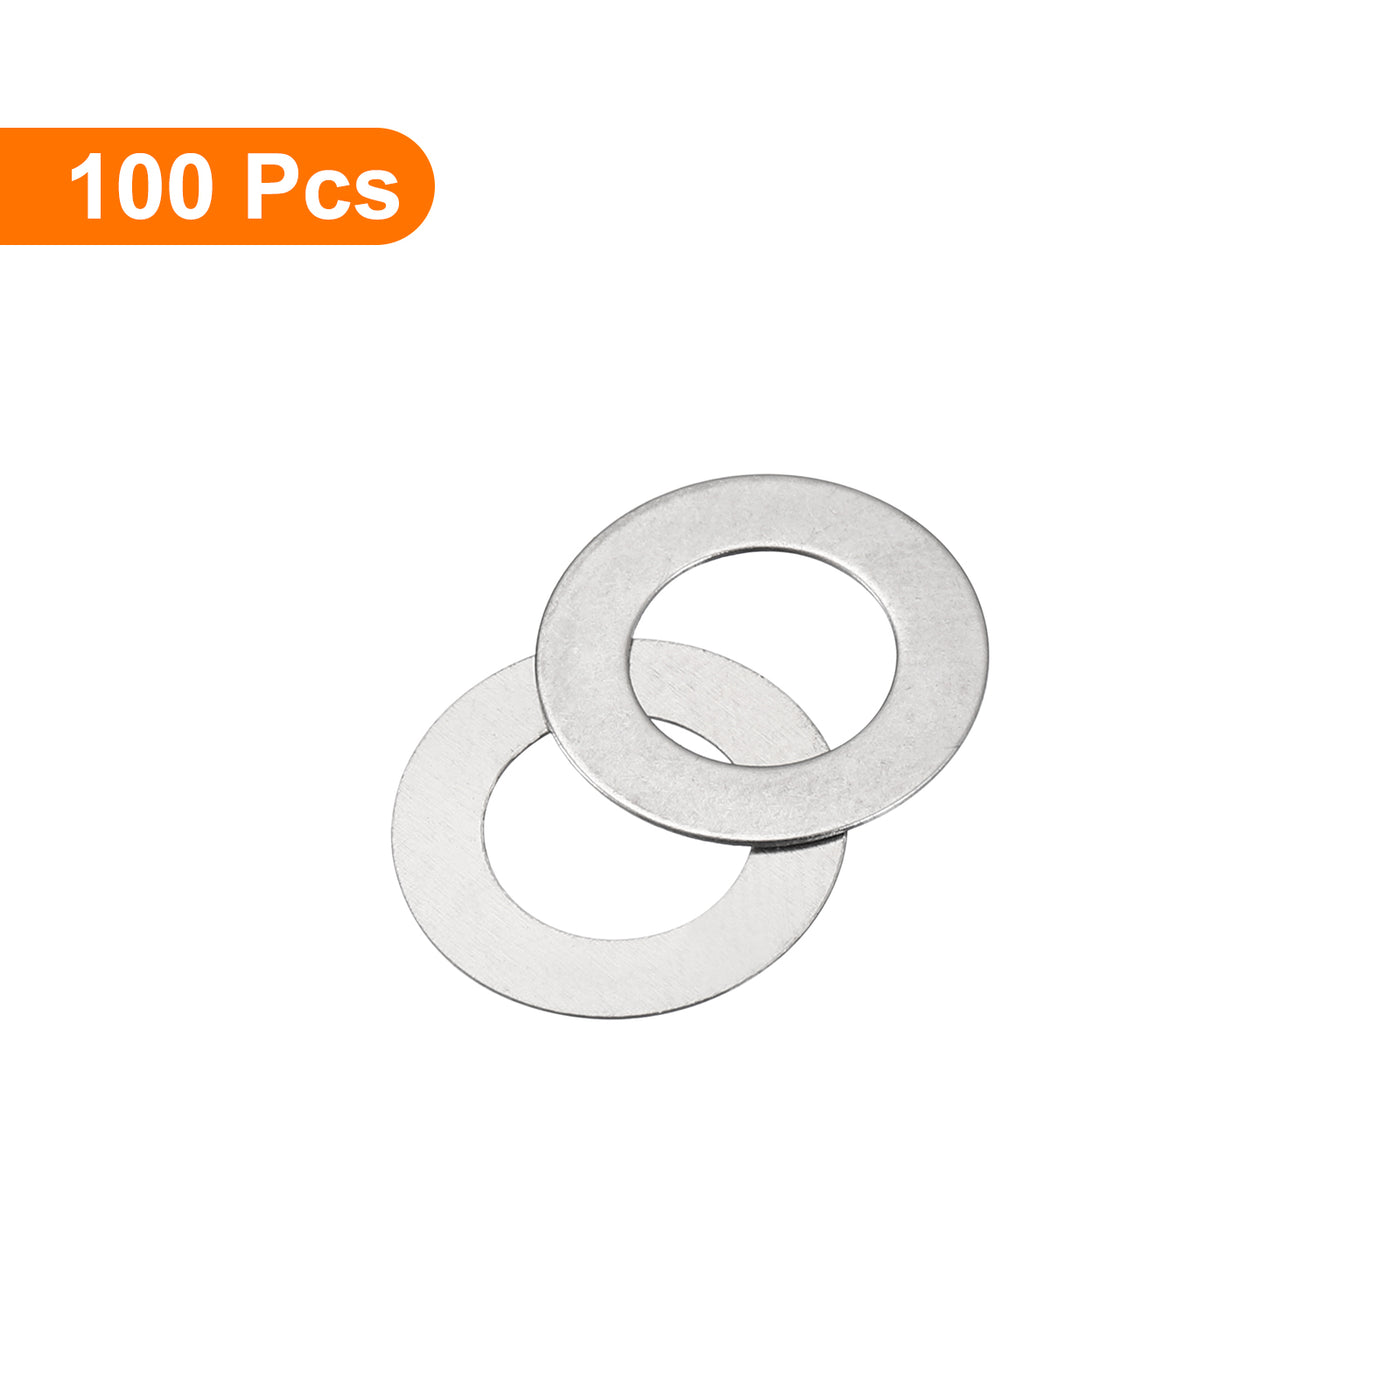 uxcell Uxcell 304 Stainless Steel Flat Washers, Ultra Thin Flat Spacers for Screw Bolt, Electronic Repair, Automotive